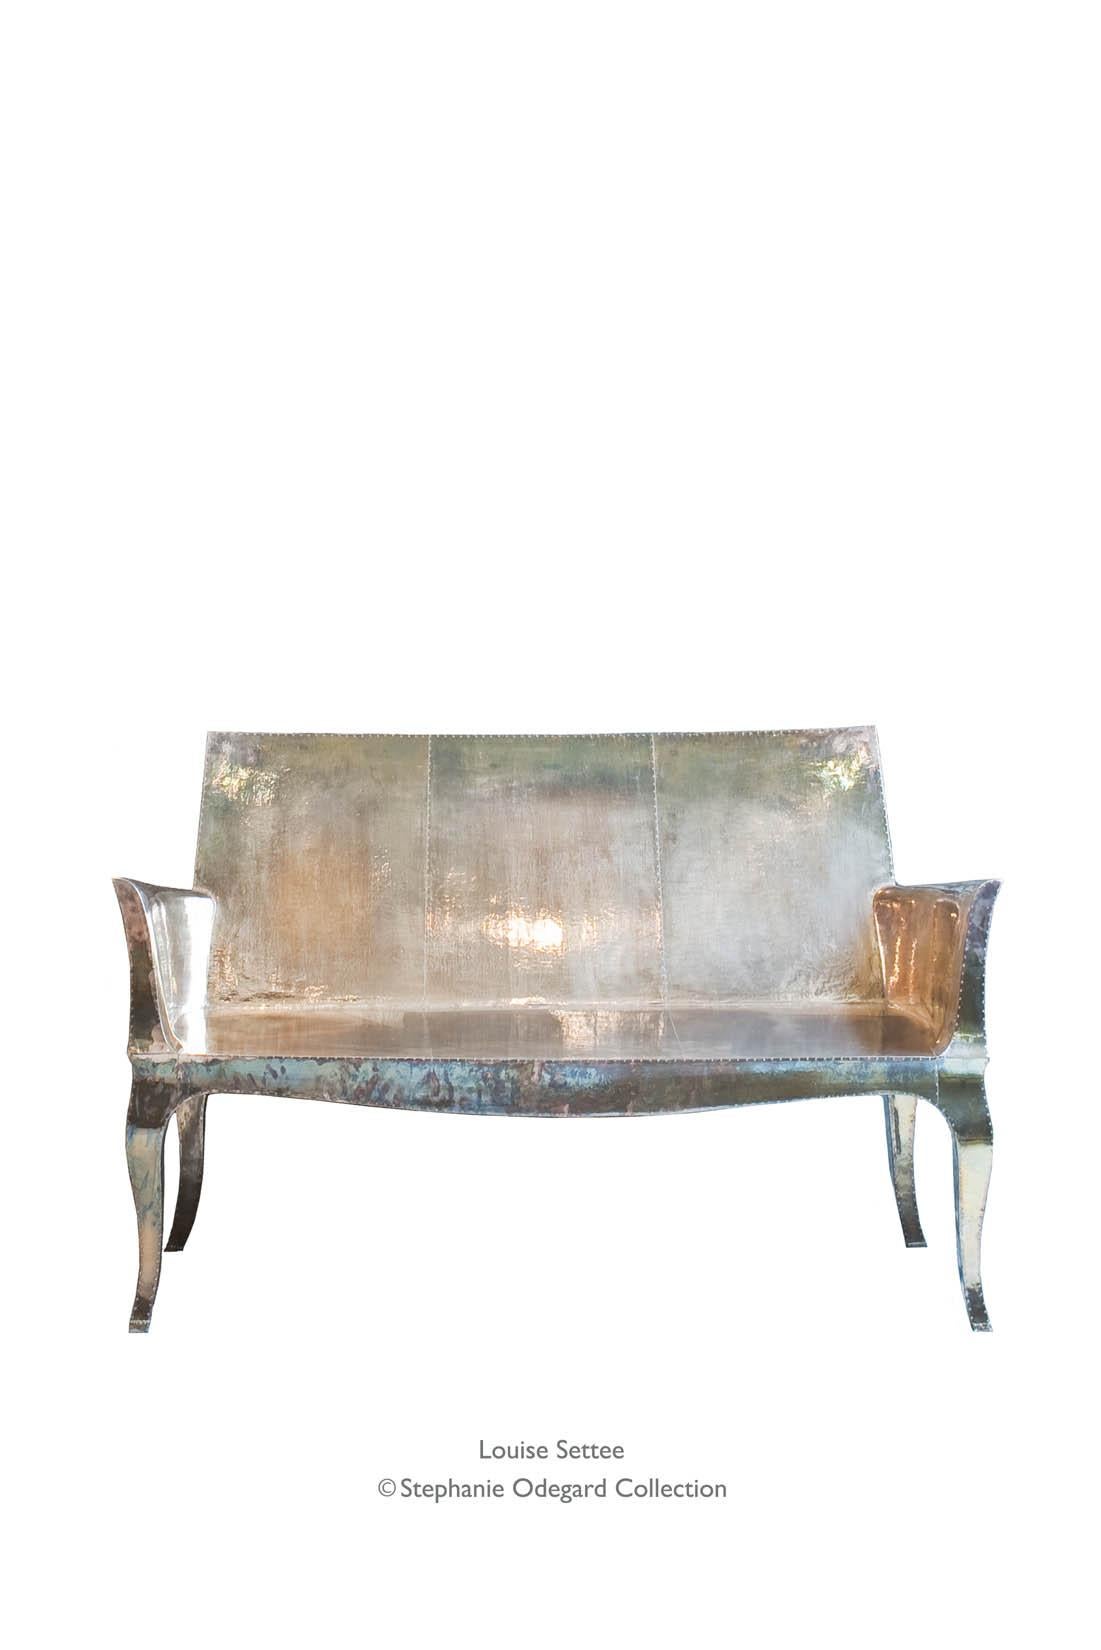 Louise Settee Art Deco Chaise Longues in Mid. Hammered White Bronze  For Sale 6